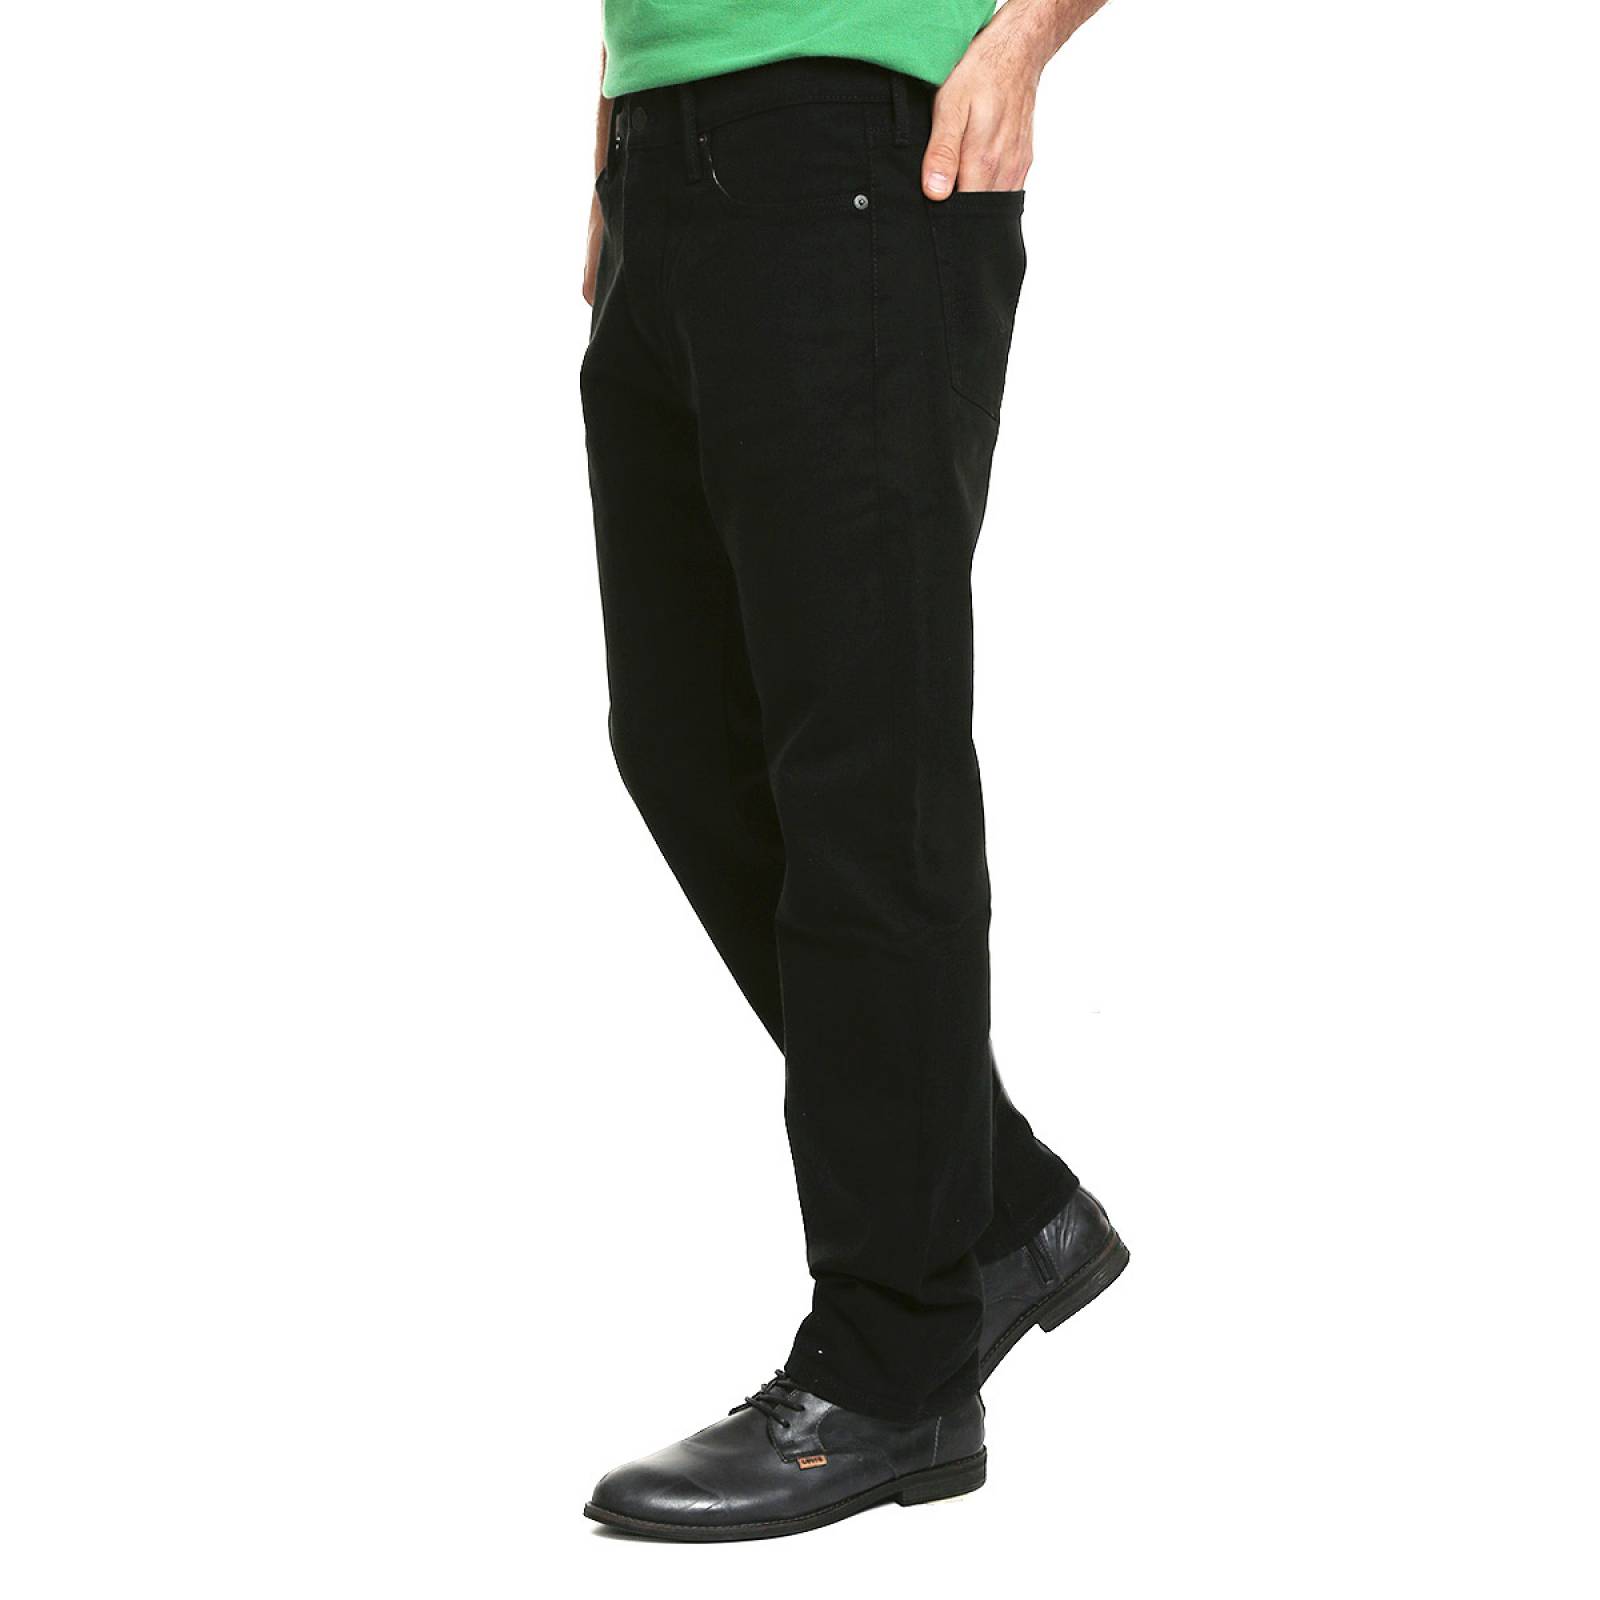 Jeans 541 Athletic aight para Caballero